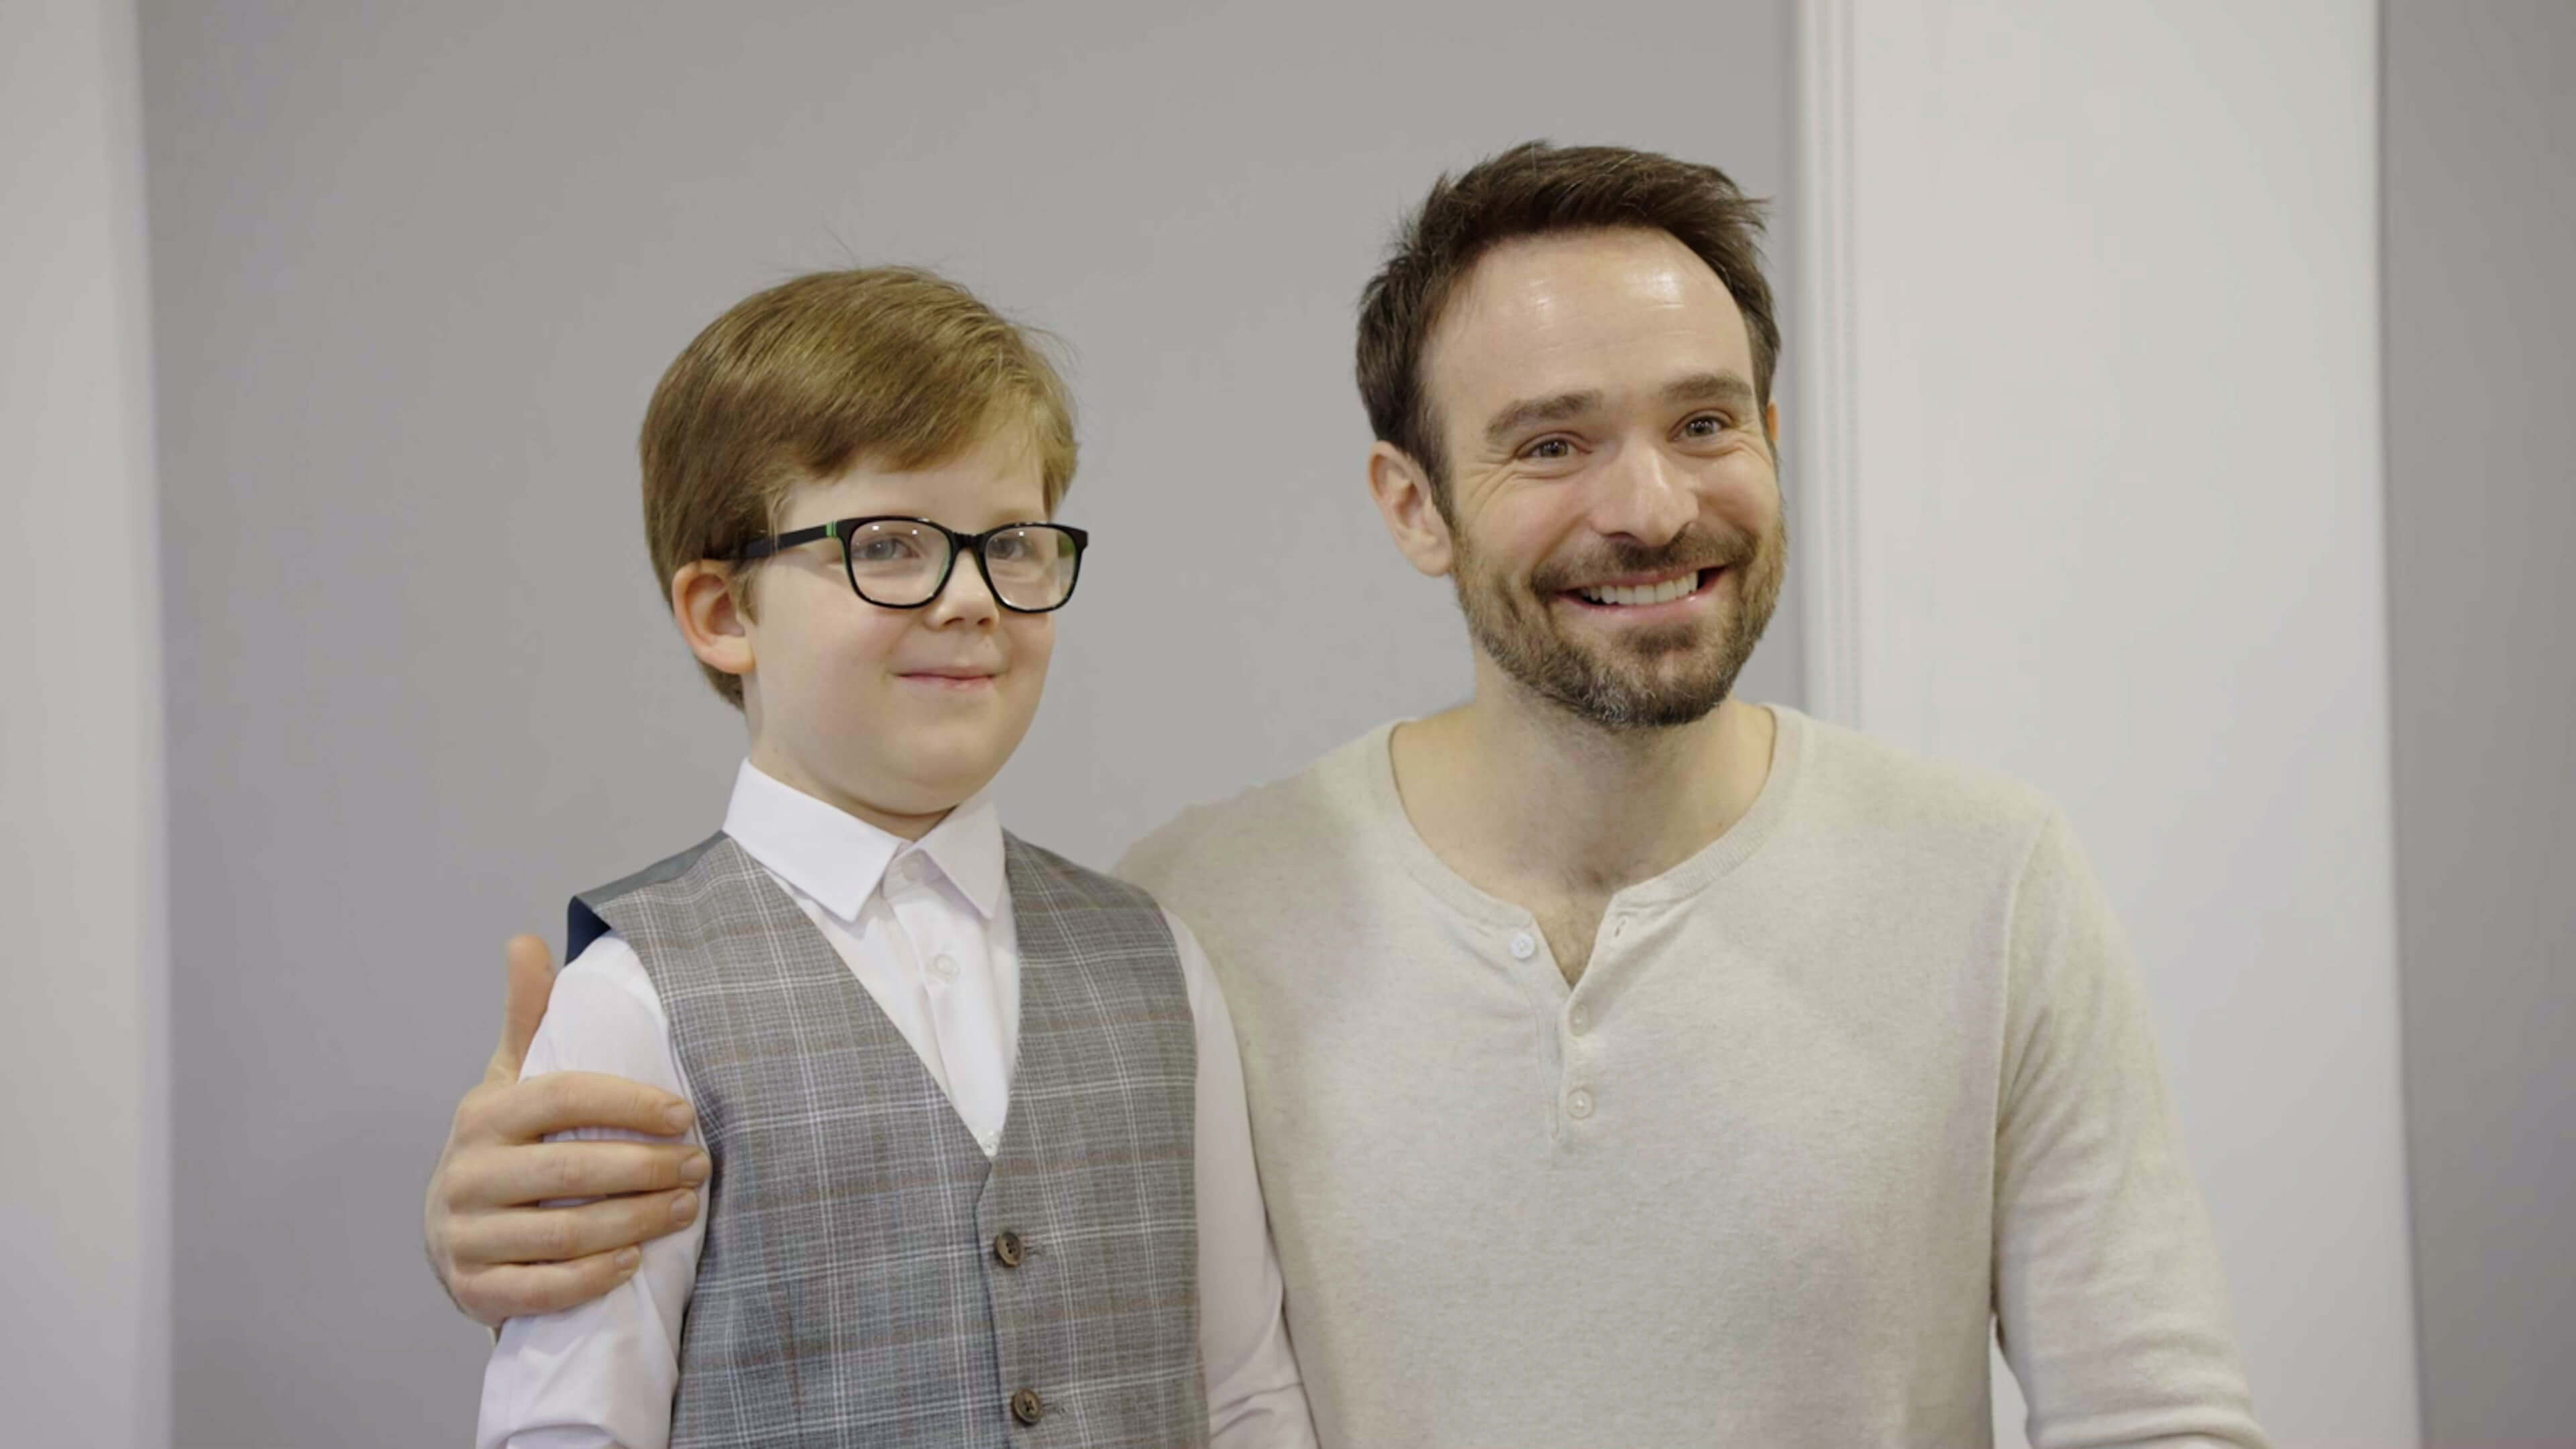 Six-year-old Rex Davies, wearing glasses, a white shirt and a grey waistcoat, stands next to Charlie Cox, who is knelling next to him. They smile to the camera.